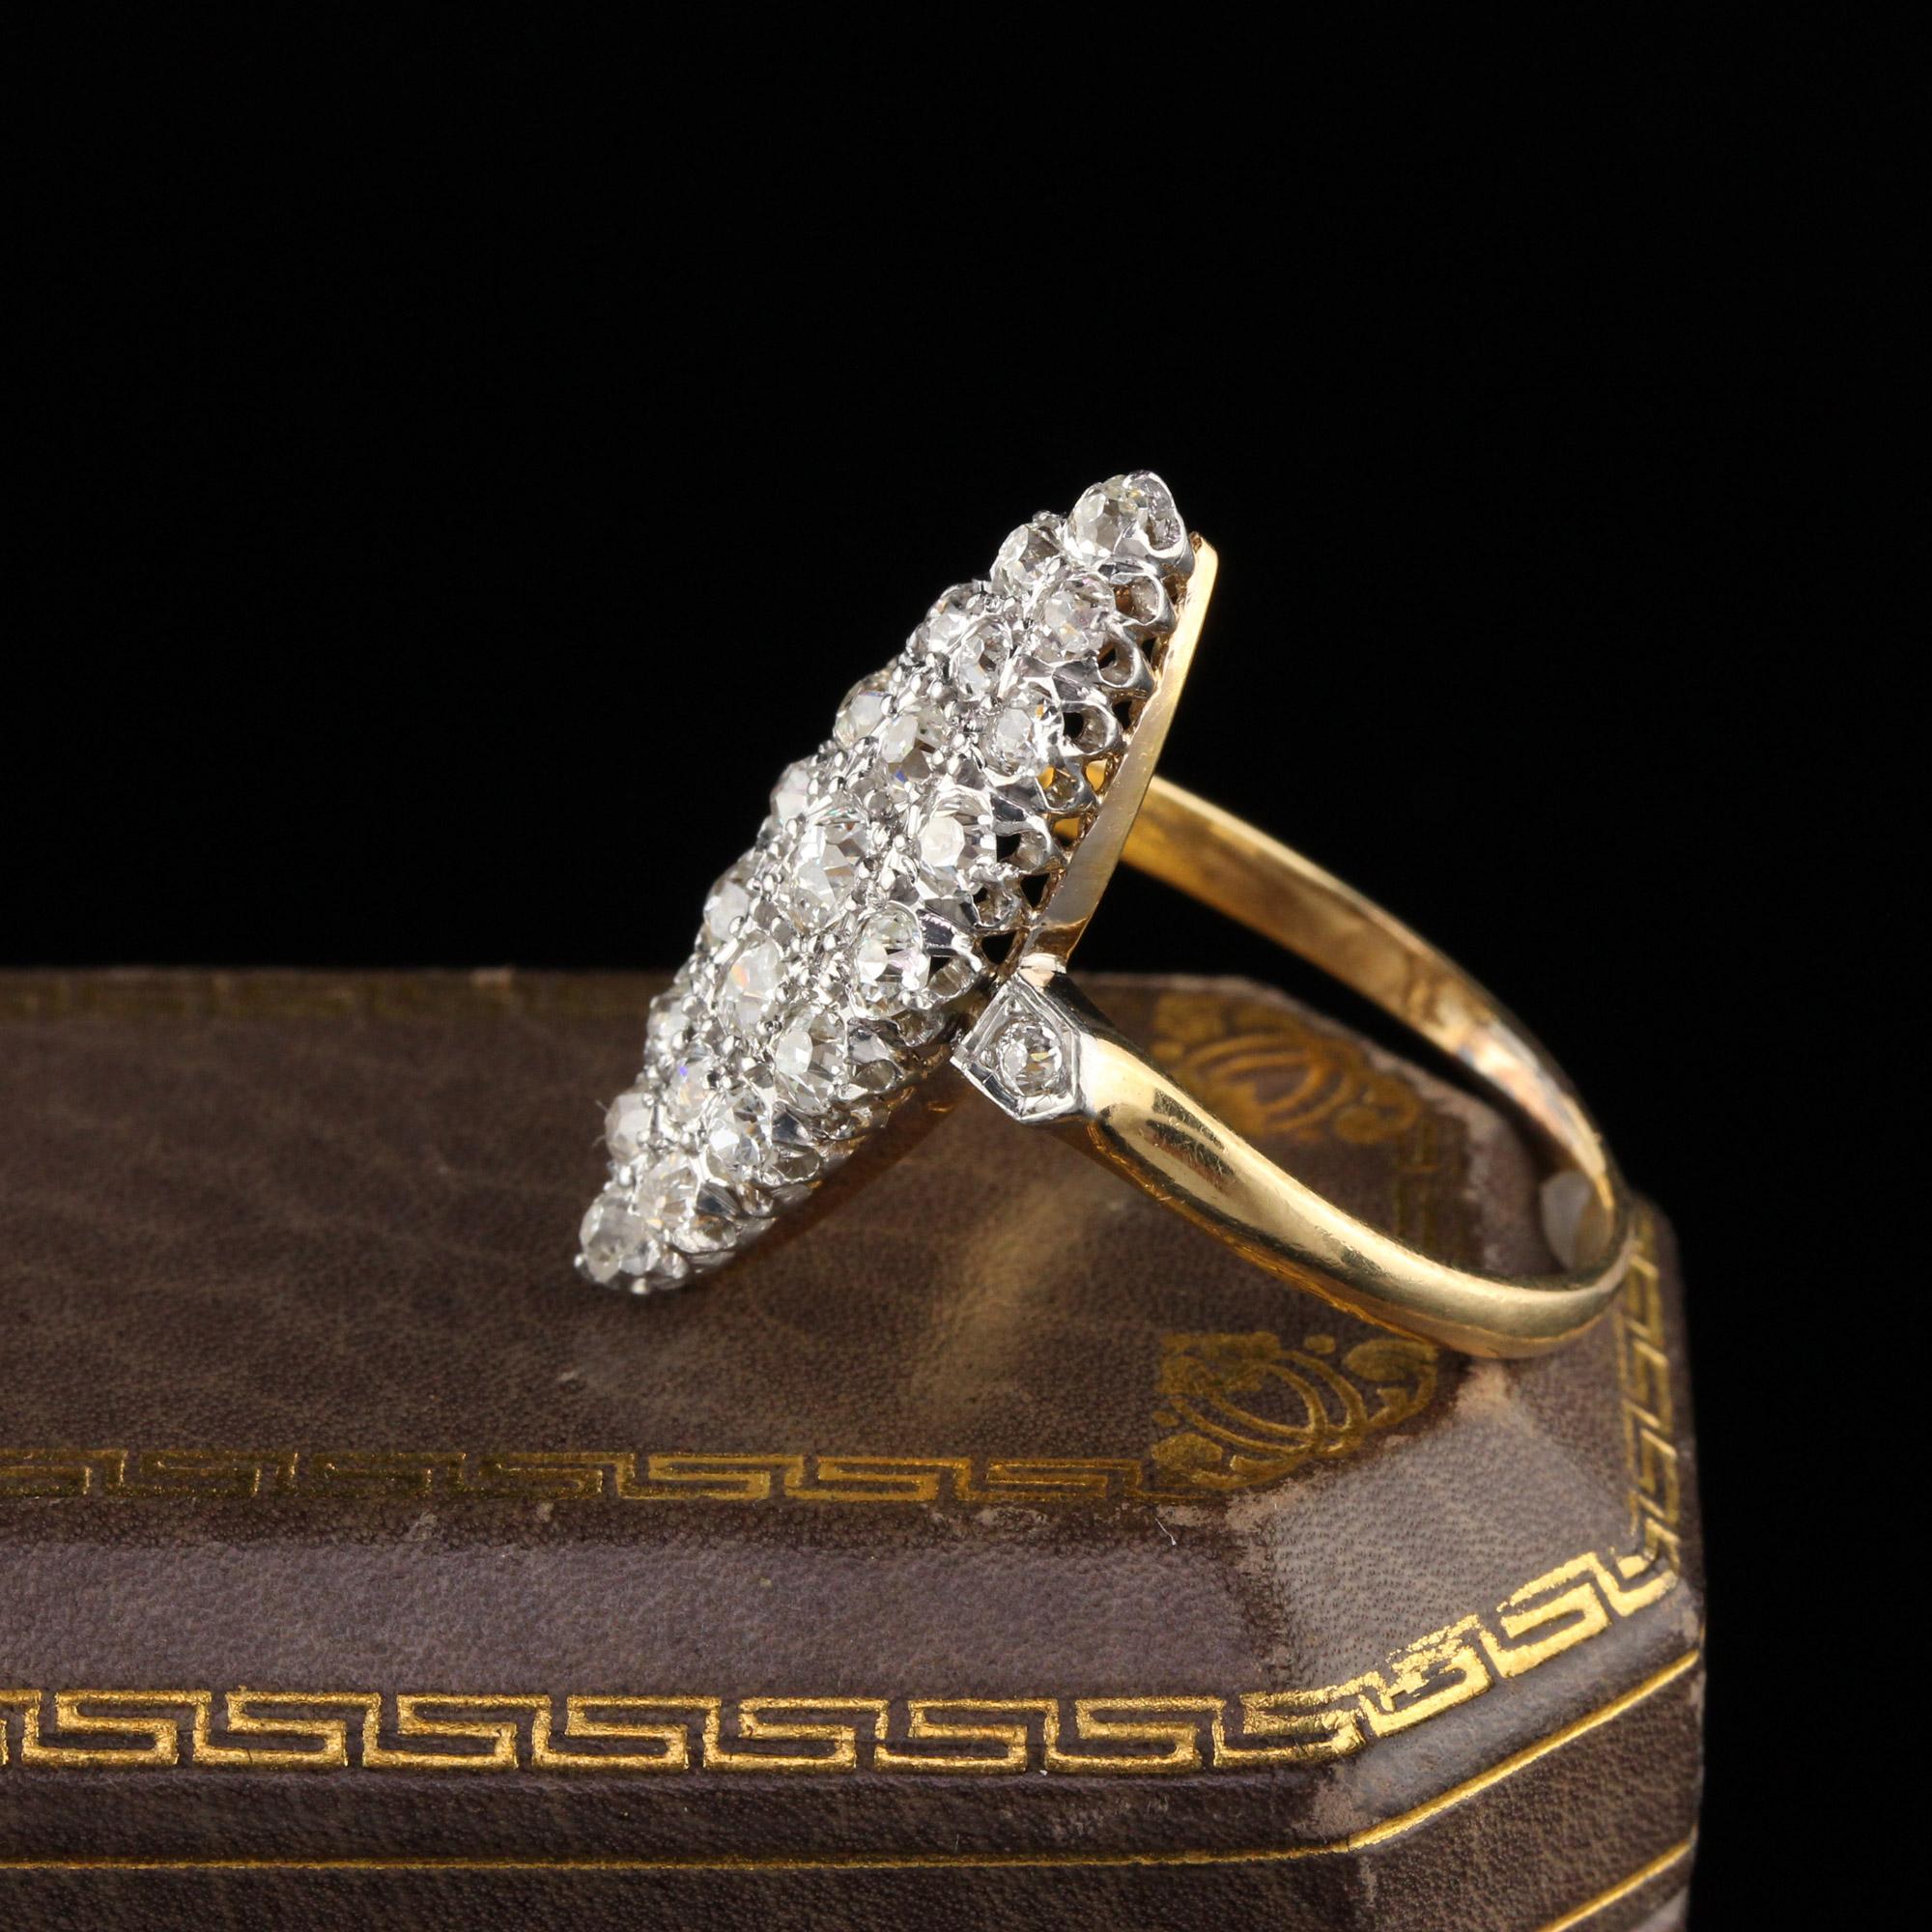 Beautiful Victorian shield ring with old mine cut diamonds. 

Item #R0568

Metal: 18K Yellow Gold & Platinum Top

Weight: 4.6 Grams

Total Diamond Weight: Approximately 1.25 cts

Diamond Color: H

Diamond Clarity: VS1

Ring Size: 8.5

This ring can